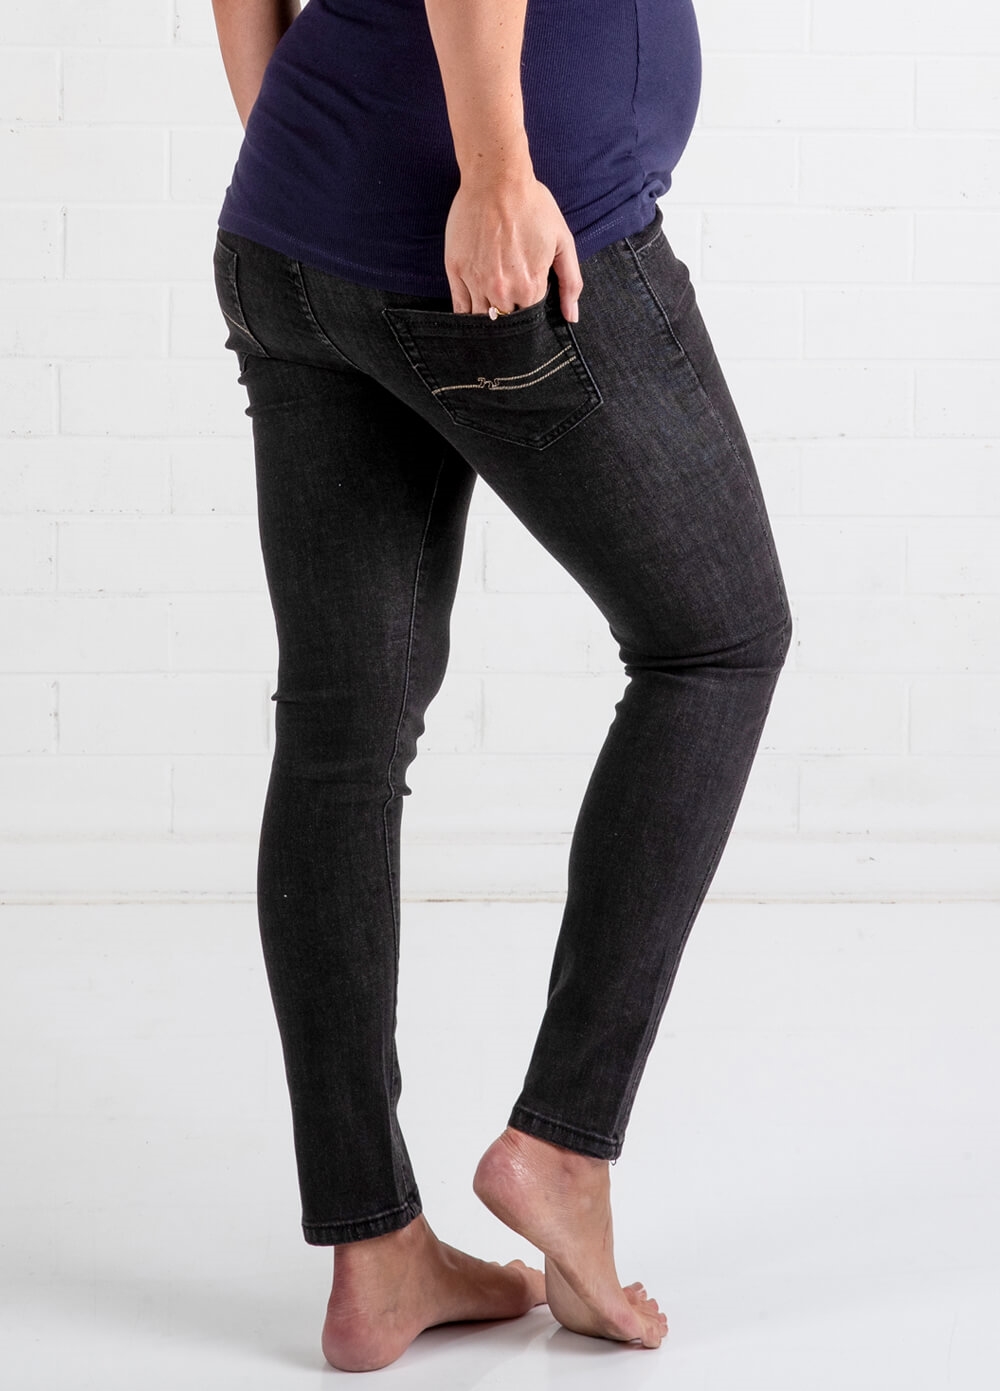 Lait & Co - Christophe Ankle Maternity Jeans in Washed Black